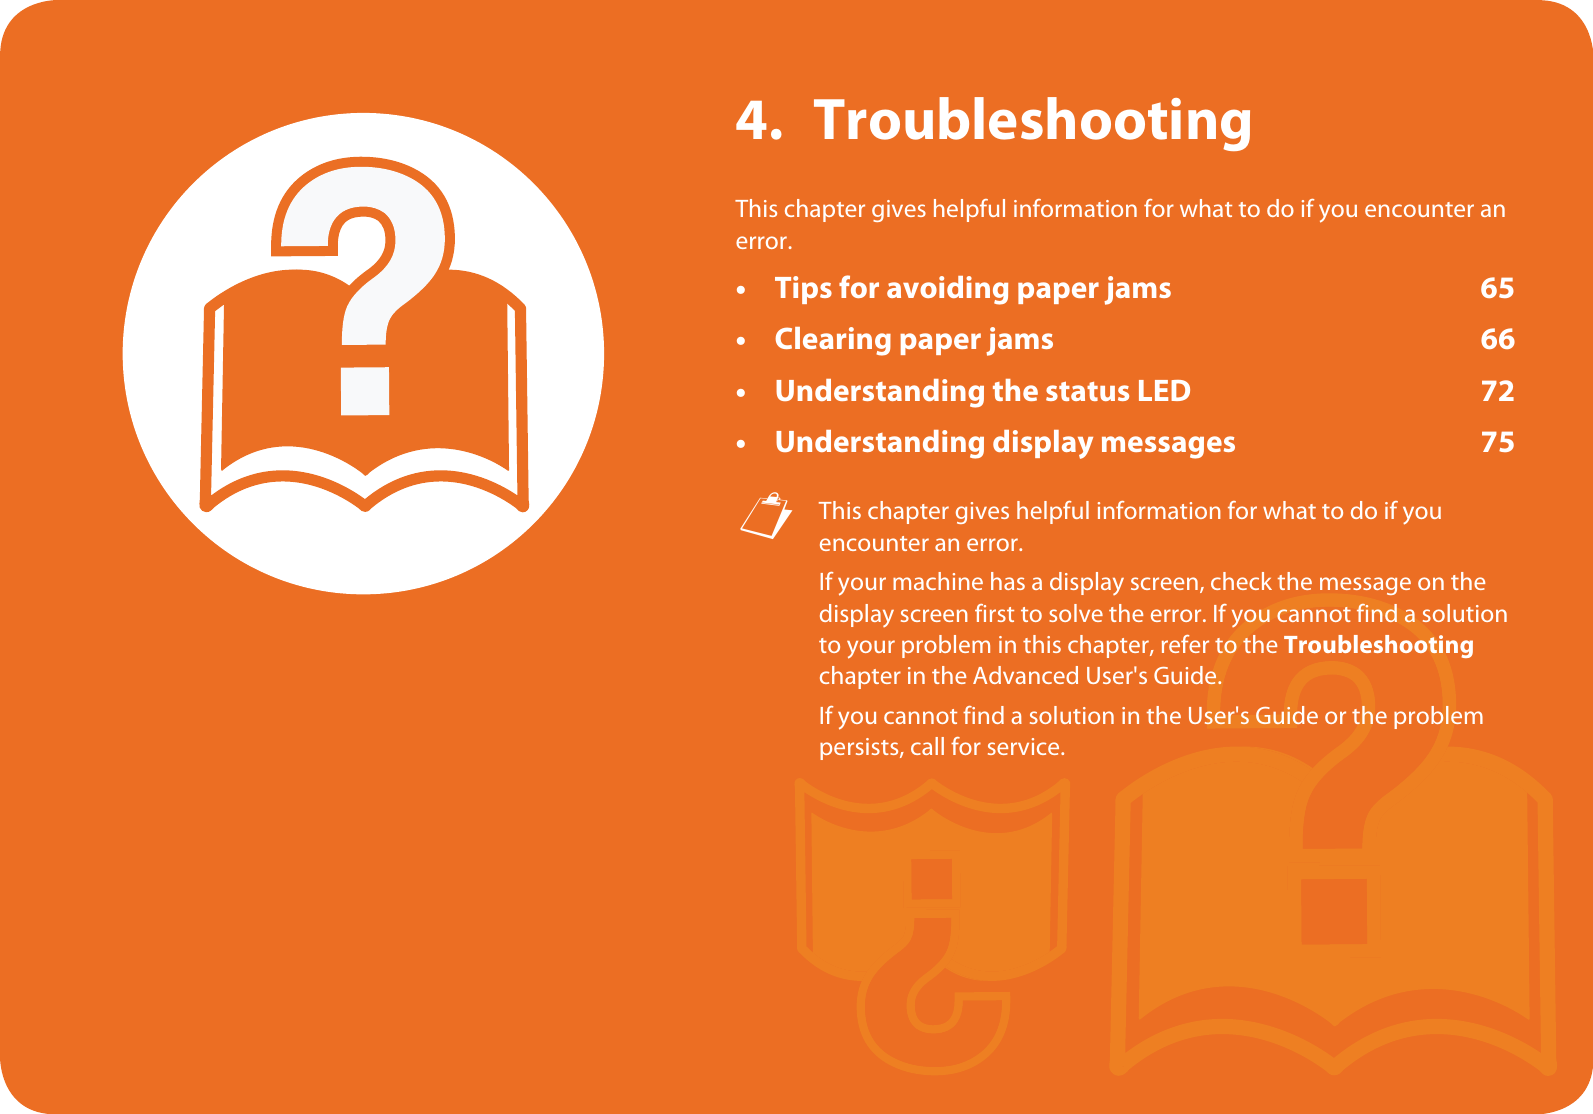 4. TroubleshootingThis chapter gives helpful information for what to do if you encounter an error.• Tips for avoiding paper jams 65• Clearing paper jams 66• Understanding the status LED 72• Understanding display messages 75 This chapter gives helpful information for what to do if you encounter an error.If your machine has a display screen, check the message on the display screen first to solve the error. If you cannot find a solution to your problem in this chapter, refer to the Troubleshooting chapter in the Advanced User&apos;s Guide.If you cannot find a solution in the User&apos;s Guide or the problem persists, call for service. 